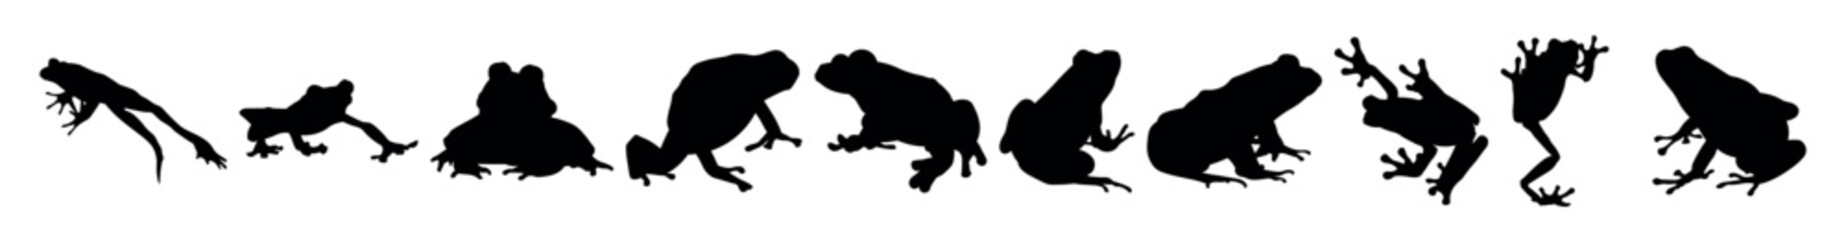 Many silhouettes of frogs on white background